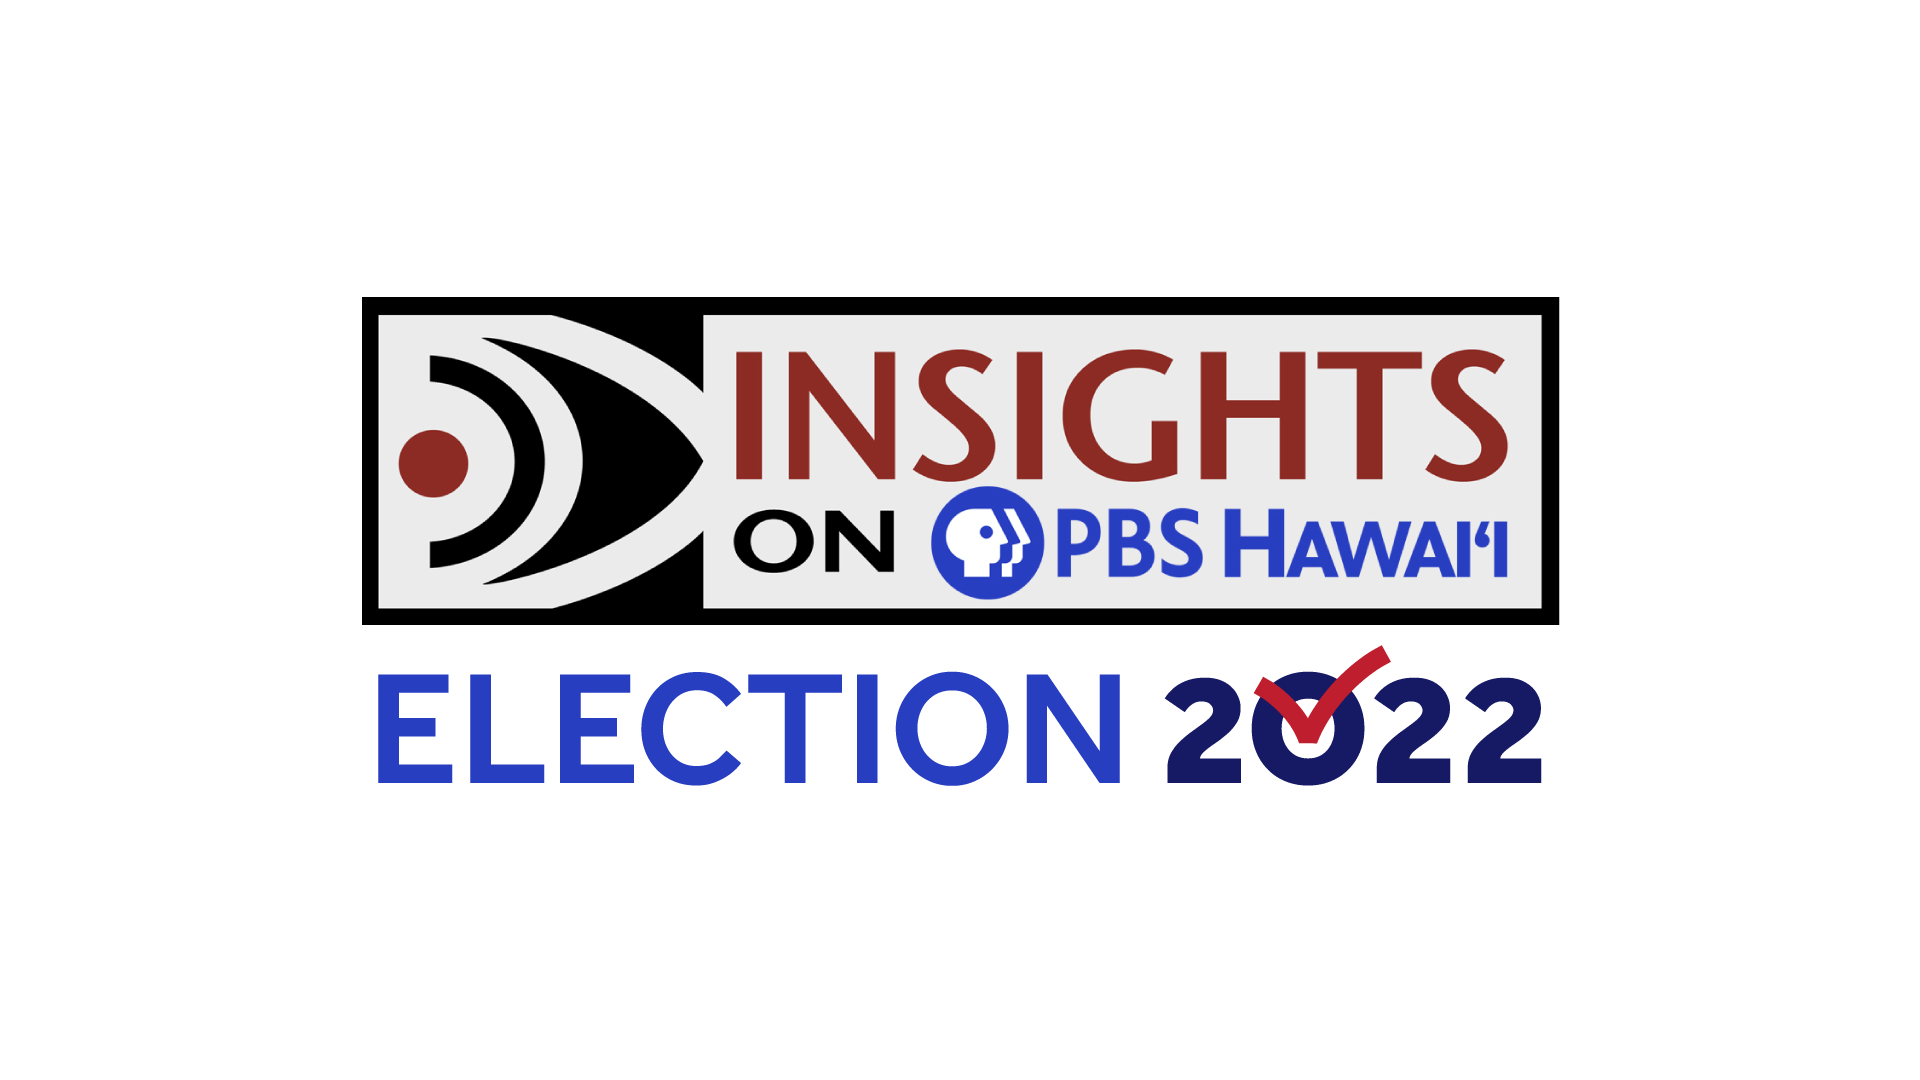 Election 2022 <br/>CANDIDATES: JUNE 16 BROADCAST <br/>INSIGHTS ON PBS HAWAIʻI